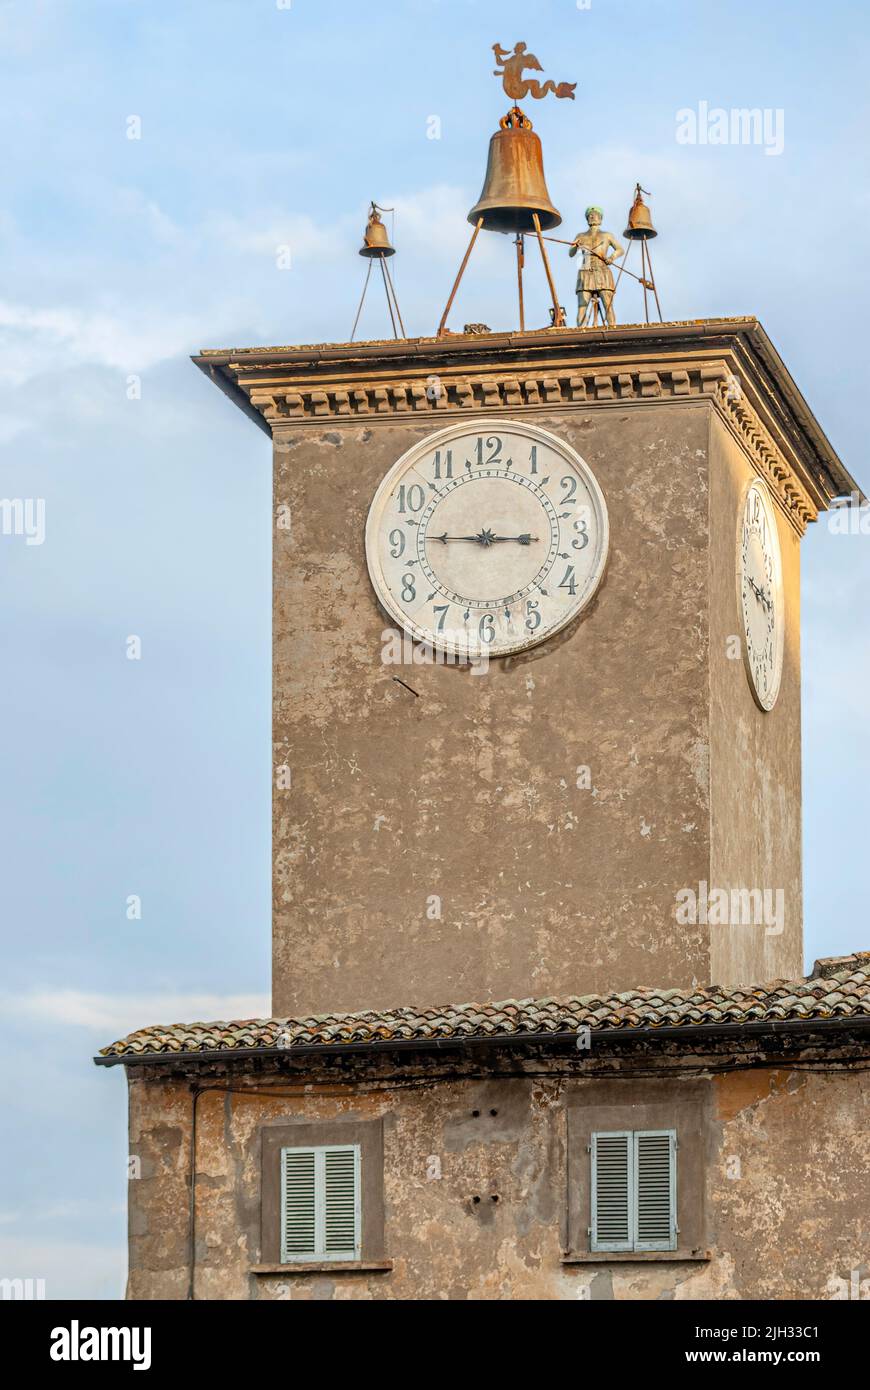 Clock with bell ringer at San Maurizio Tower (Torre di Maurizio), Orvieto, Umbria, Italy Stock Photo